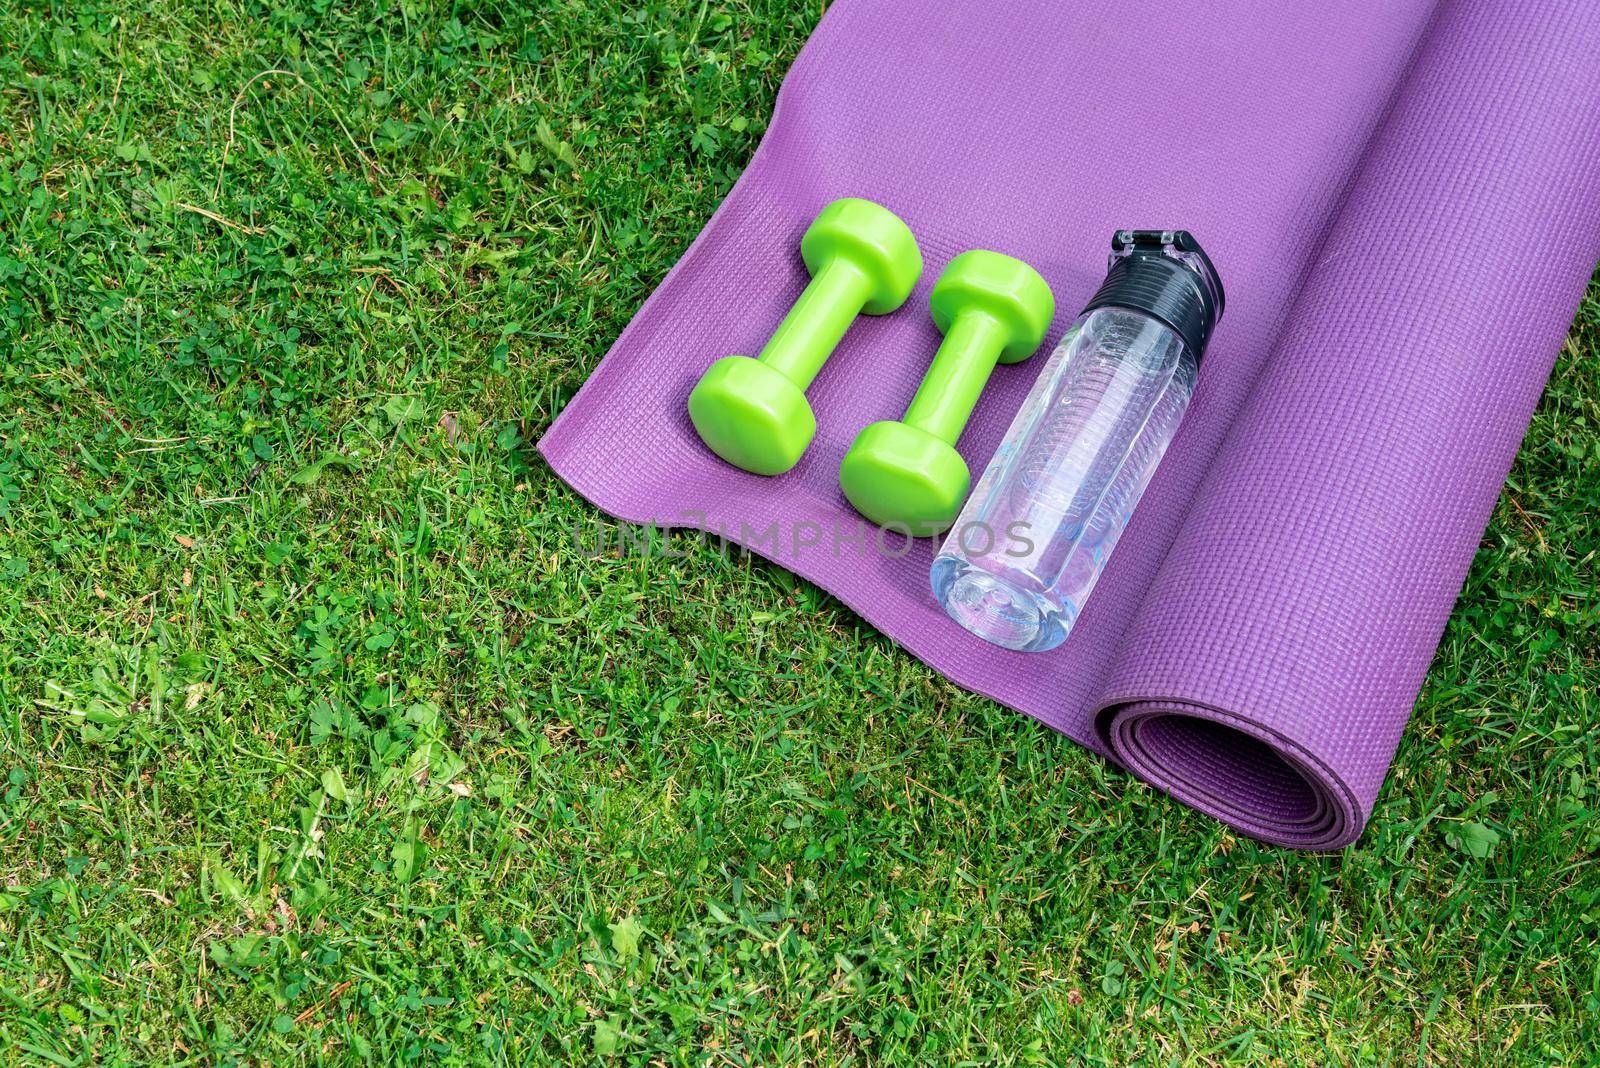 Ladie's dumbbells, fitness mat and water bottle on the green grass background. Copy-space. by anytka